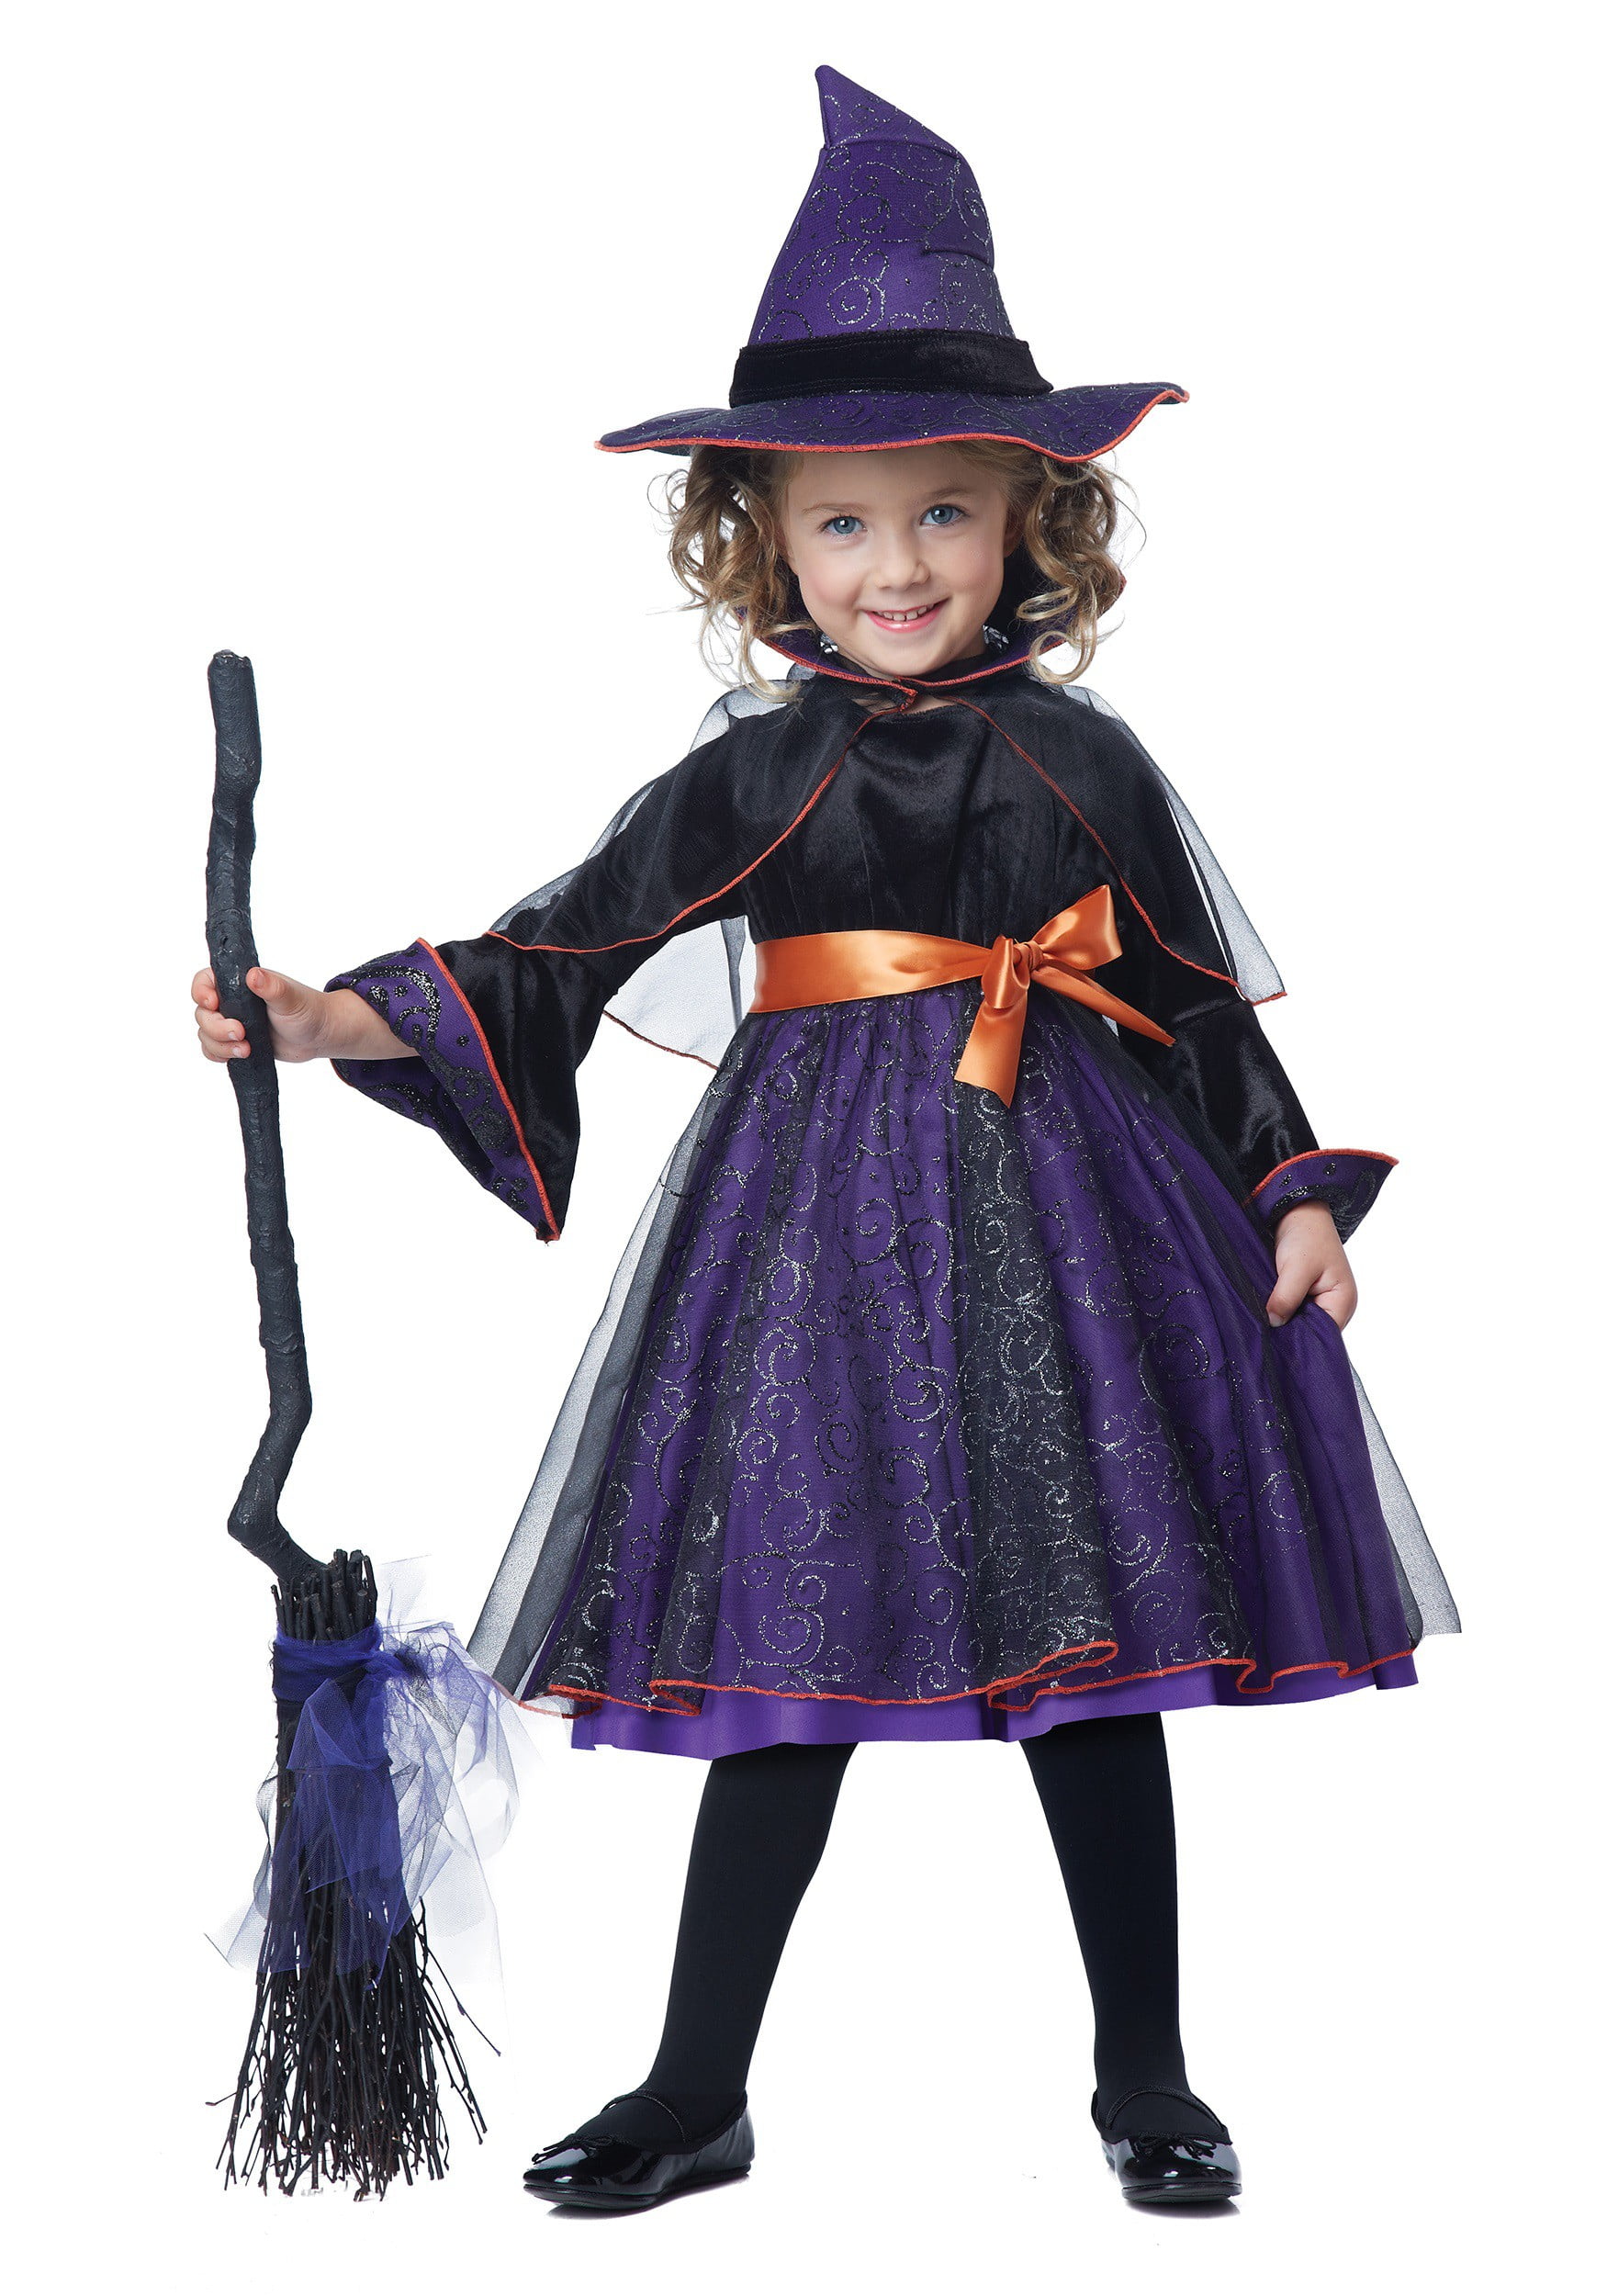 California Costumes Women's Witch's Broom Black One Size 